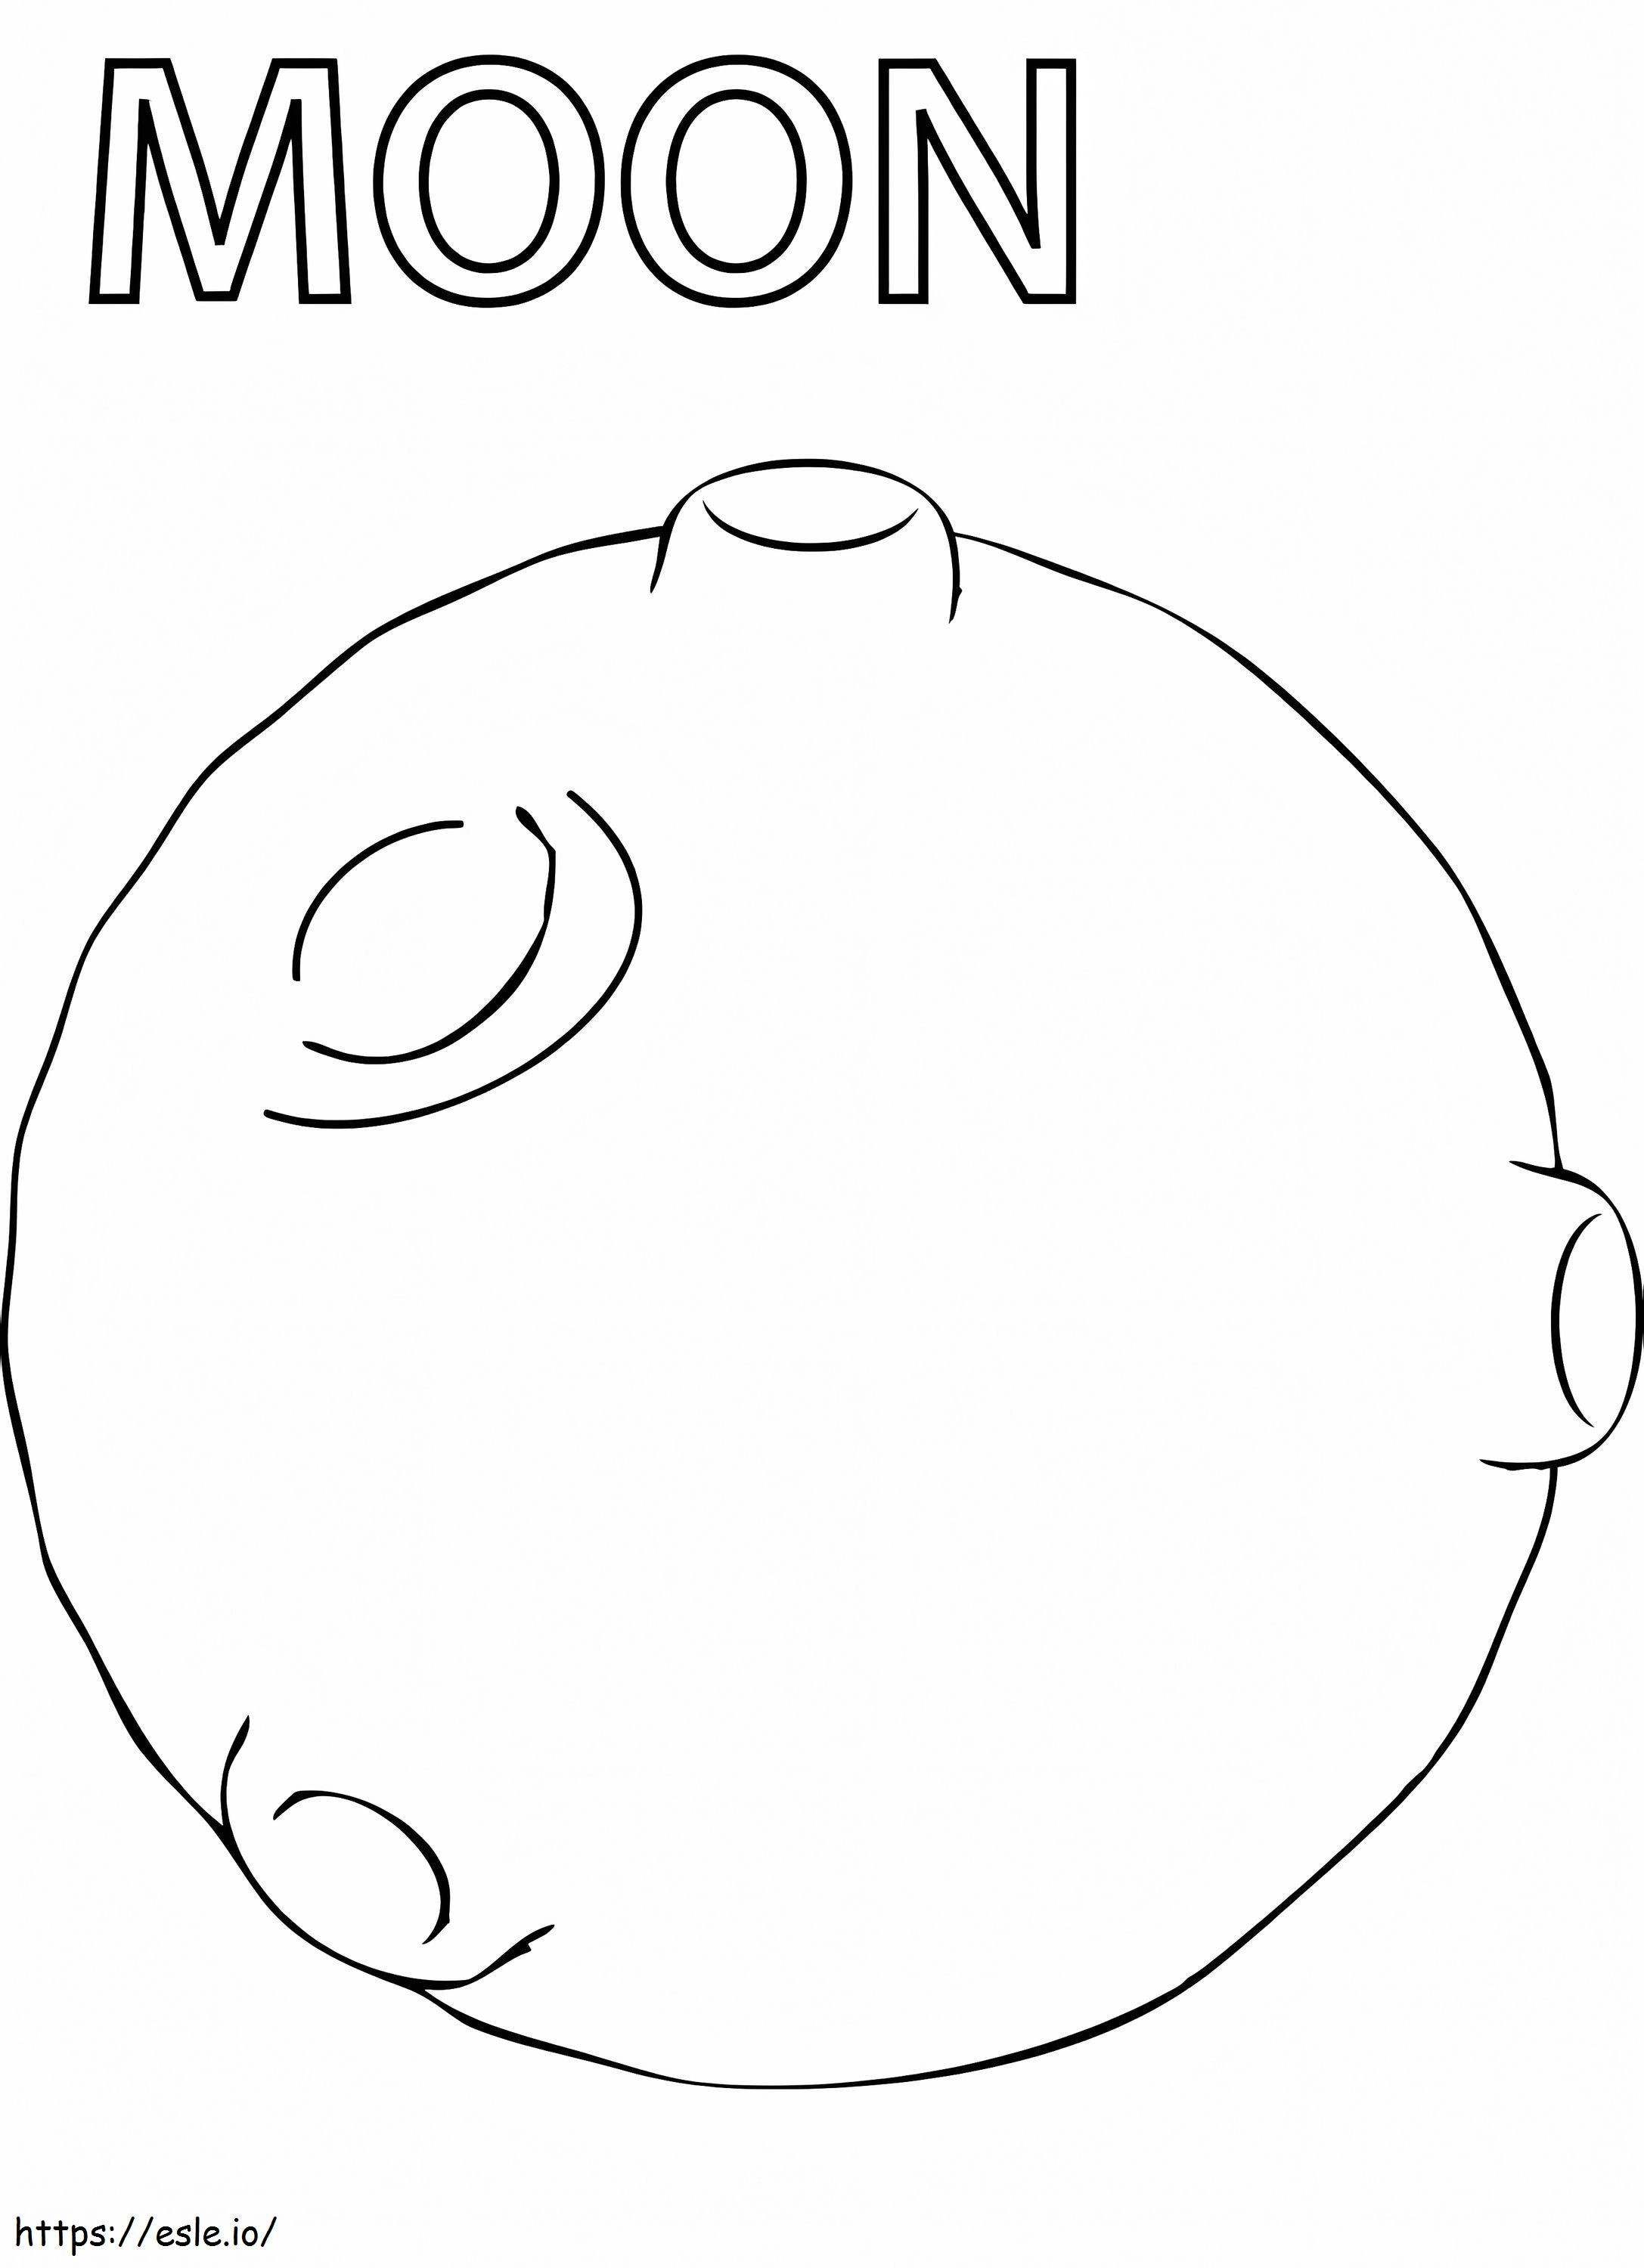 Simple Moon coloring page